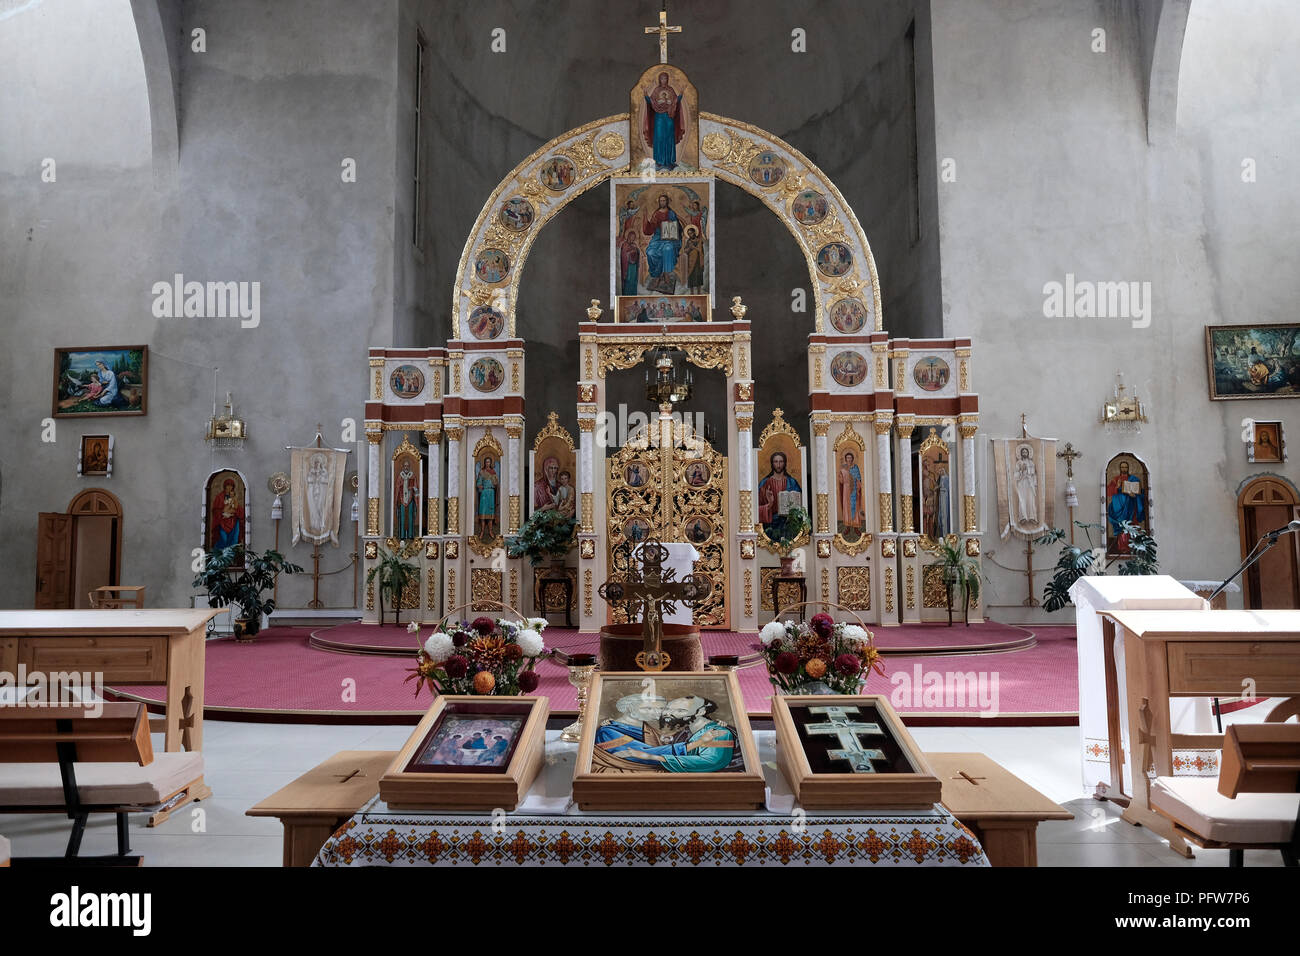 Interior of Cathedral of the Supreme Peter and Paul, established on a former Jewish compound in the city of Chortkiv which was once home to a large Jewish community and was annihilated, brutally, by the Germans during the Second World War in Ternopil Oblast (province) in western Ukraine. Stock Photo